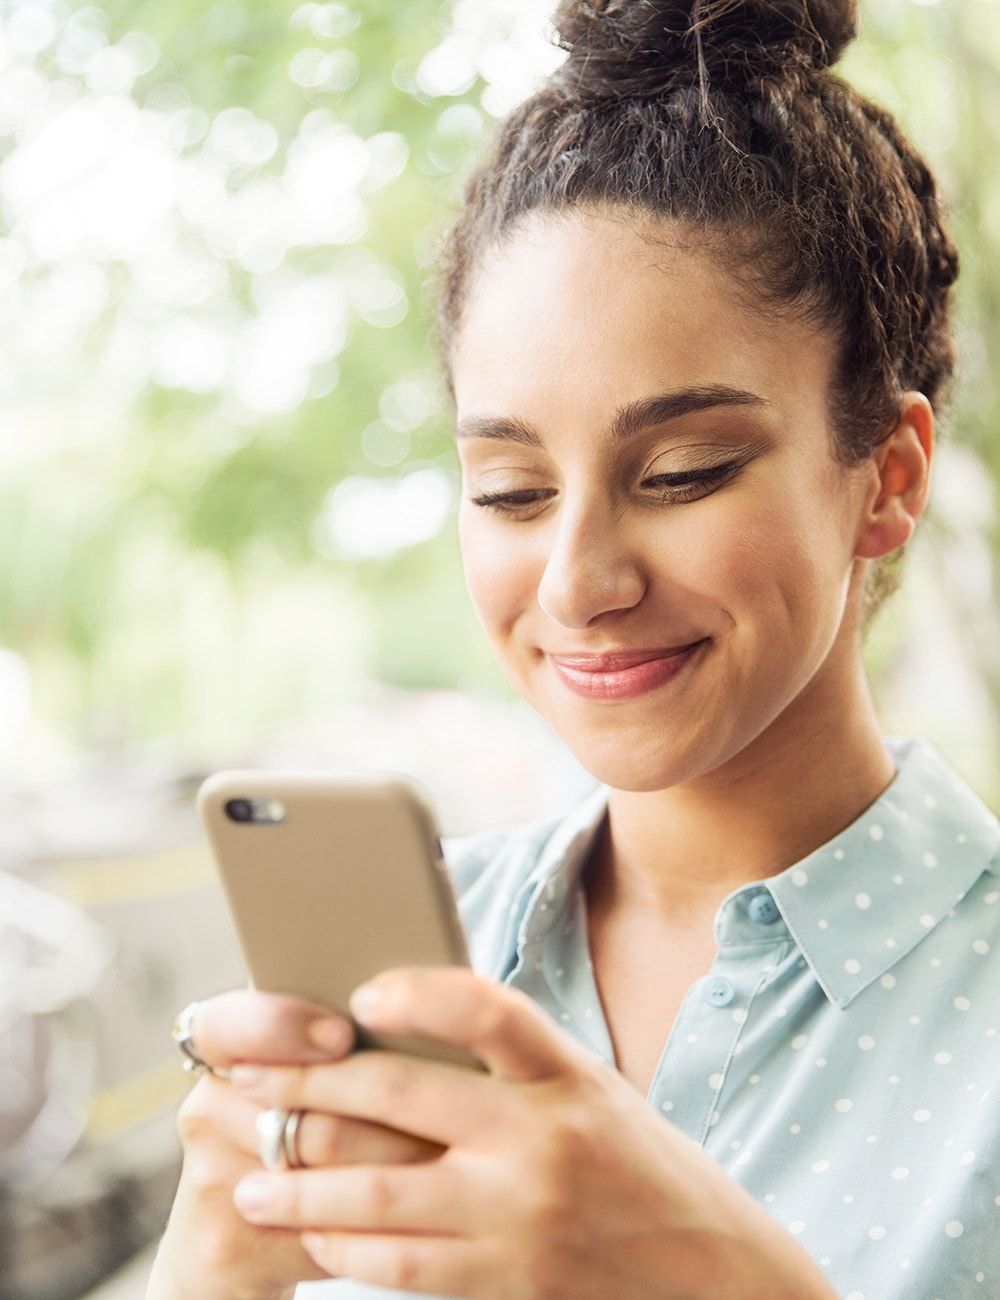 Woman looking at cell phone and smiling